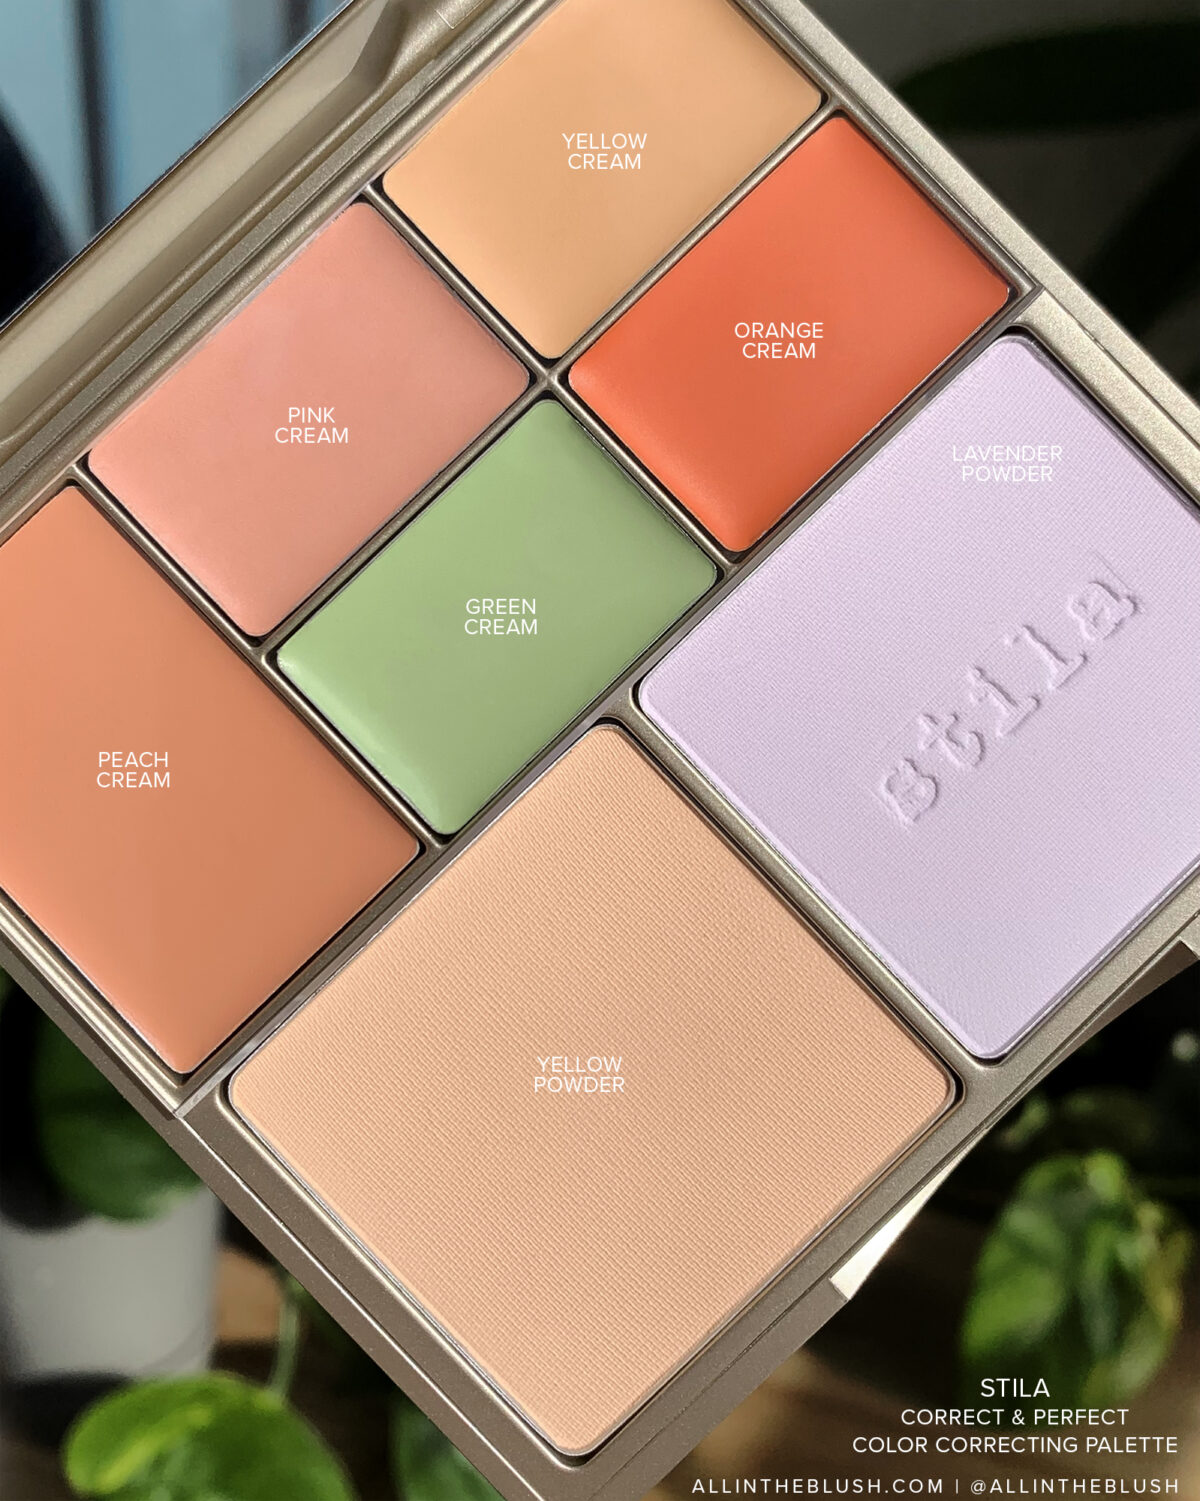 Stila Correct and Perfect All-In-One Color Correcting Palette Review & Swatches